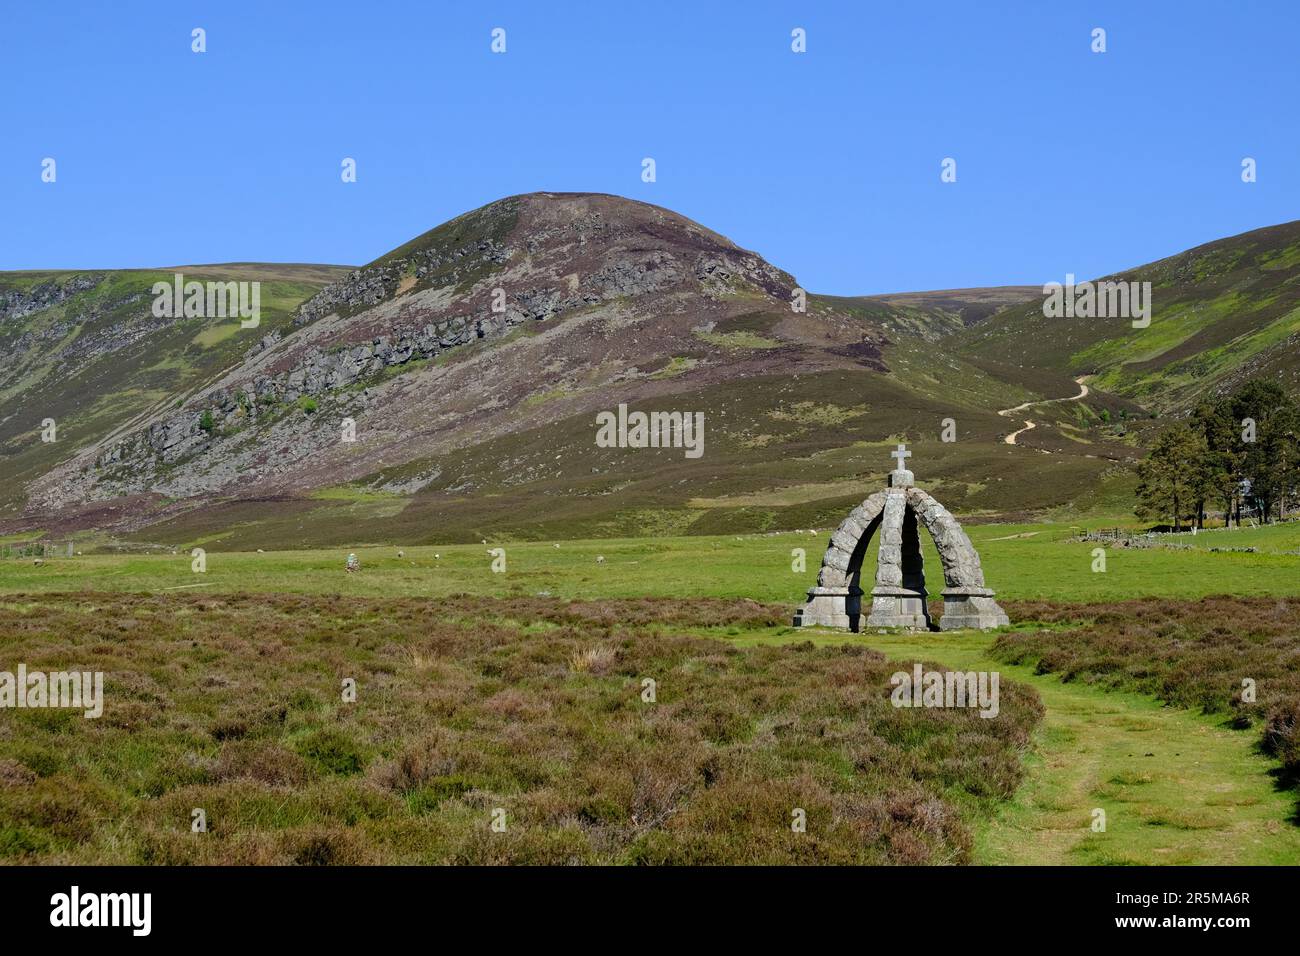 The Queen's Well, Glen Mark, Angus Glens Scotland. Built by Lord Dalhousie to commemorate a visit by Queen Victoria and Prince Albert in 1861. Stock Photo